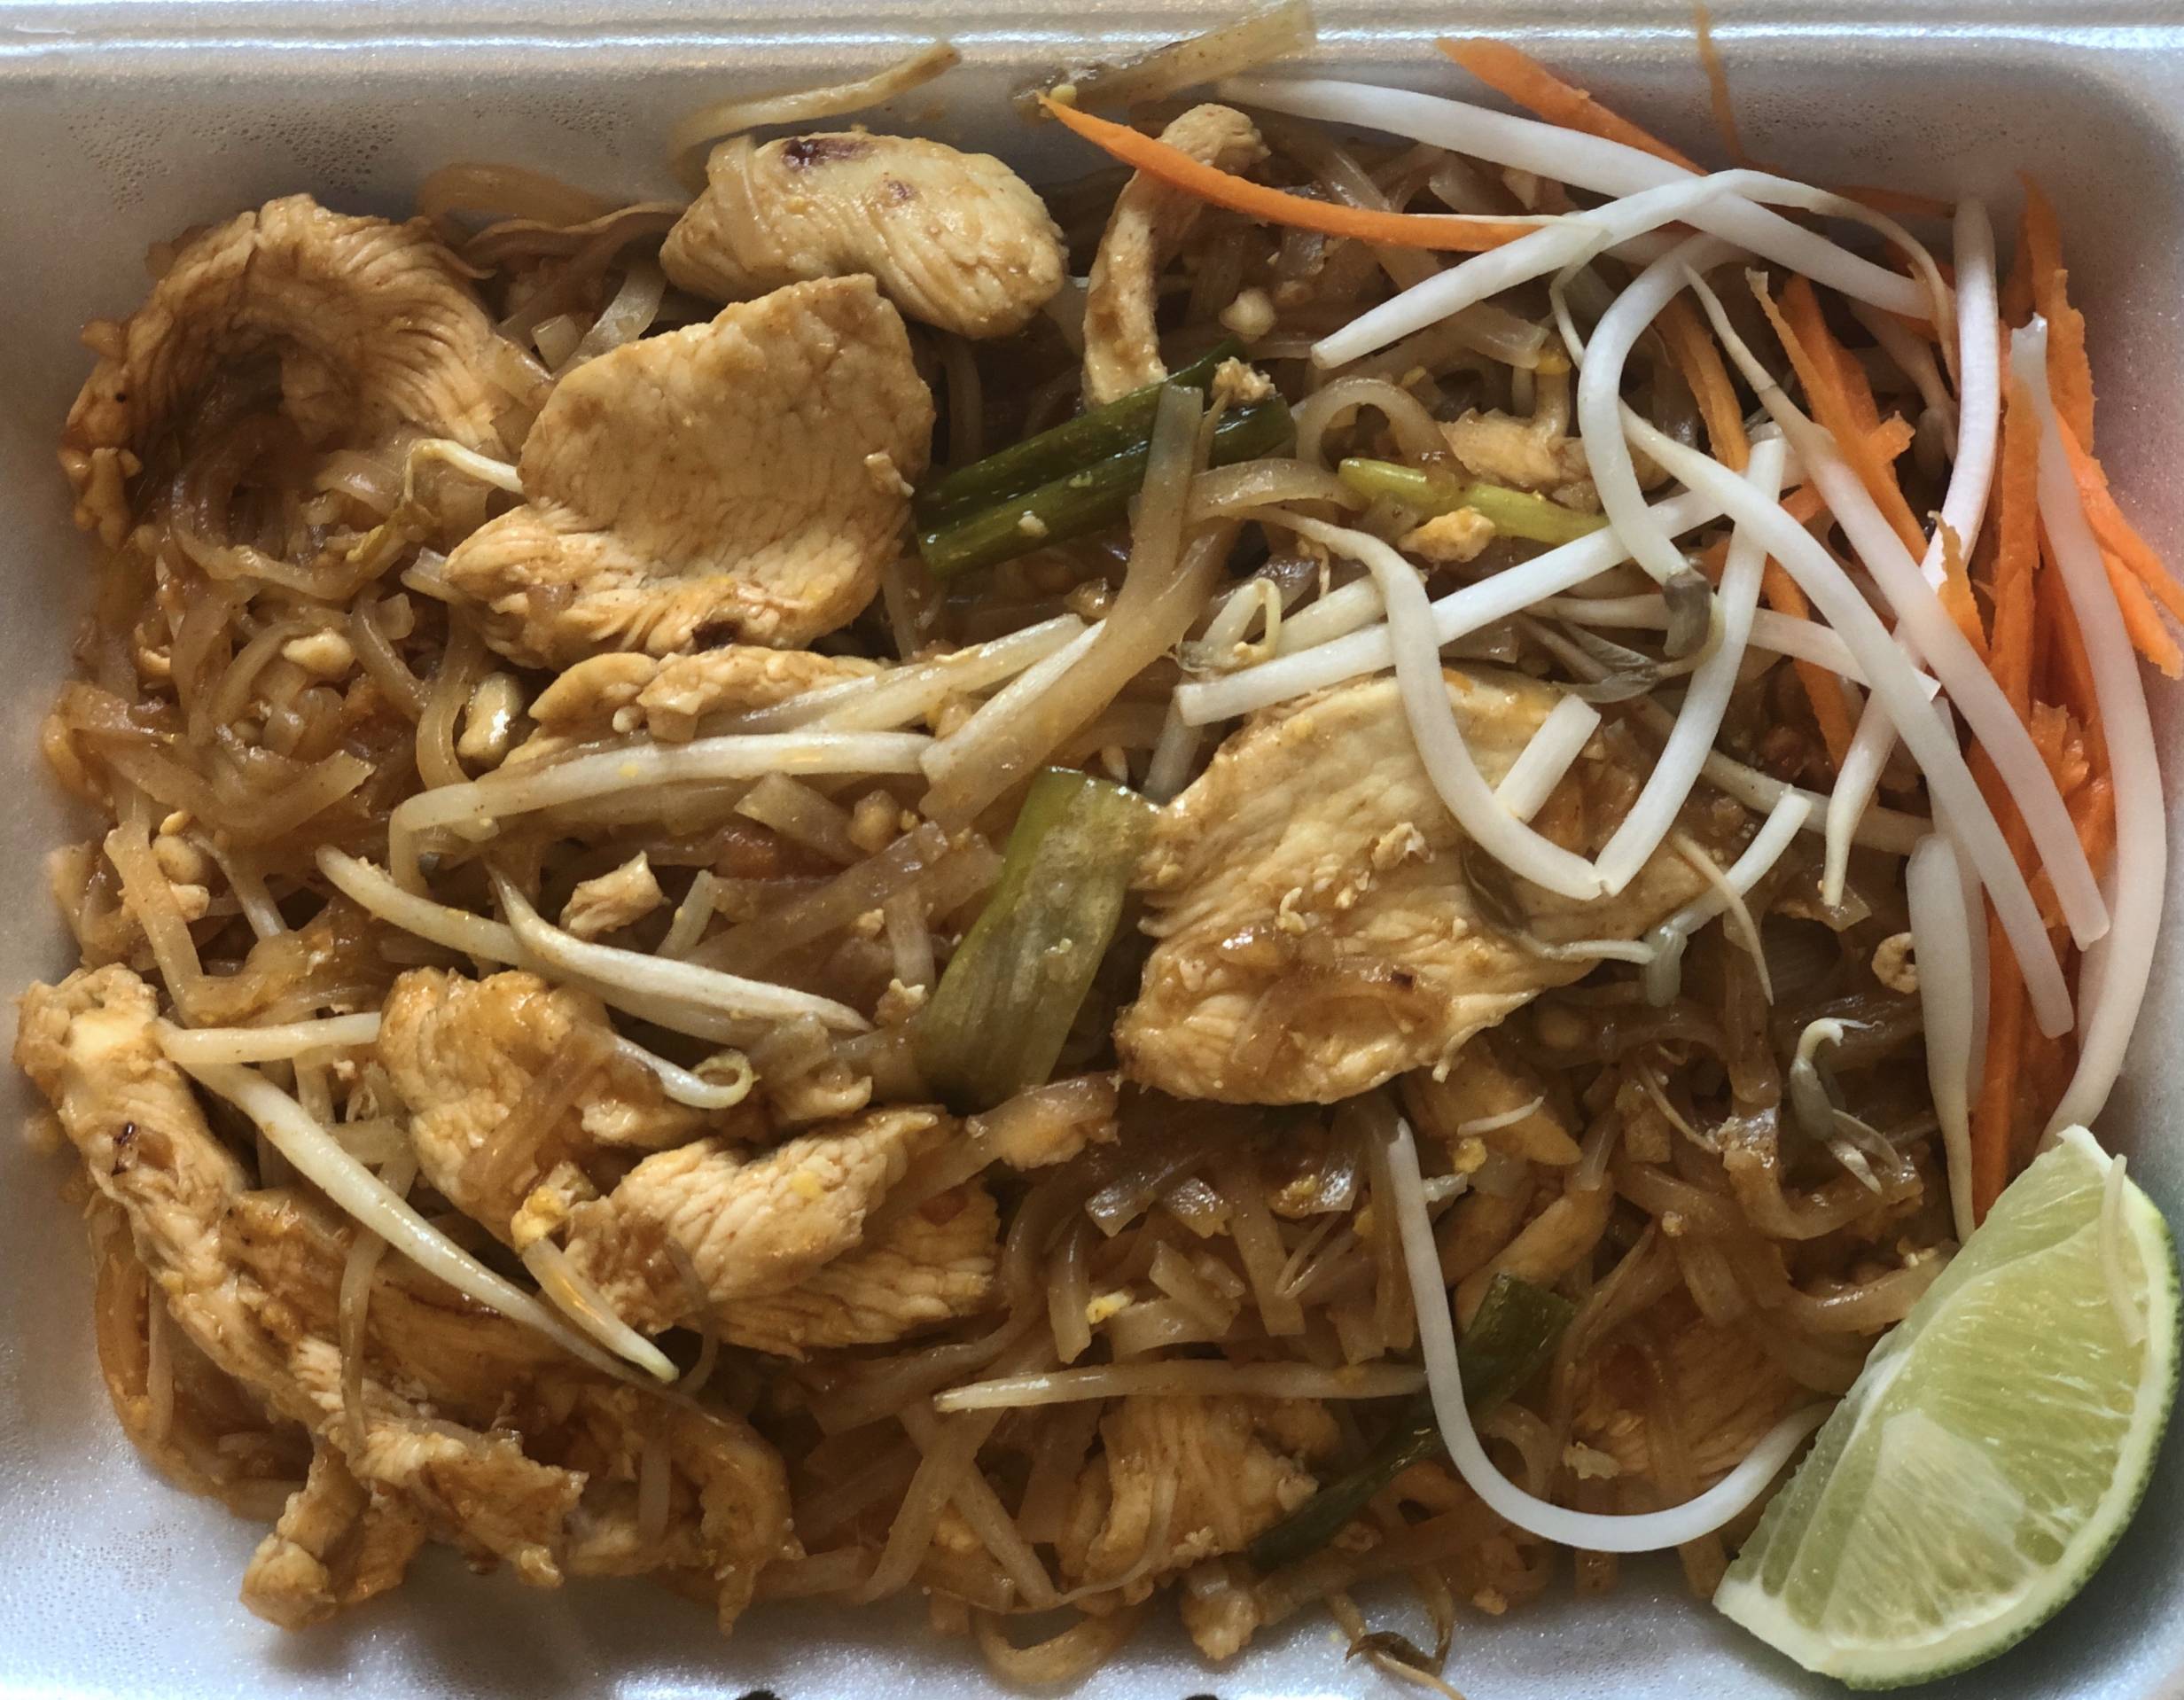 A styrofoam container of pad thai is overflowing with noodles, chicken, bean sprouts, carrots, and a lime wedge. Photo by Alyssa Buckley.